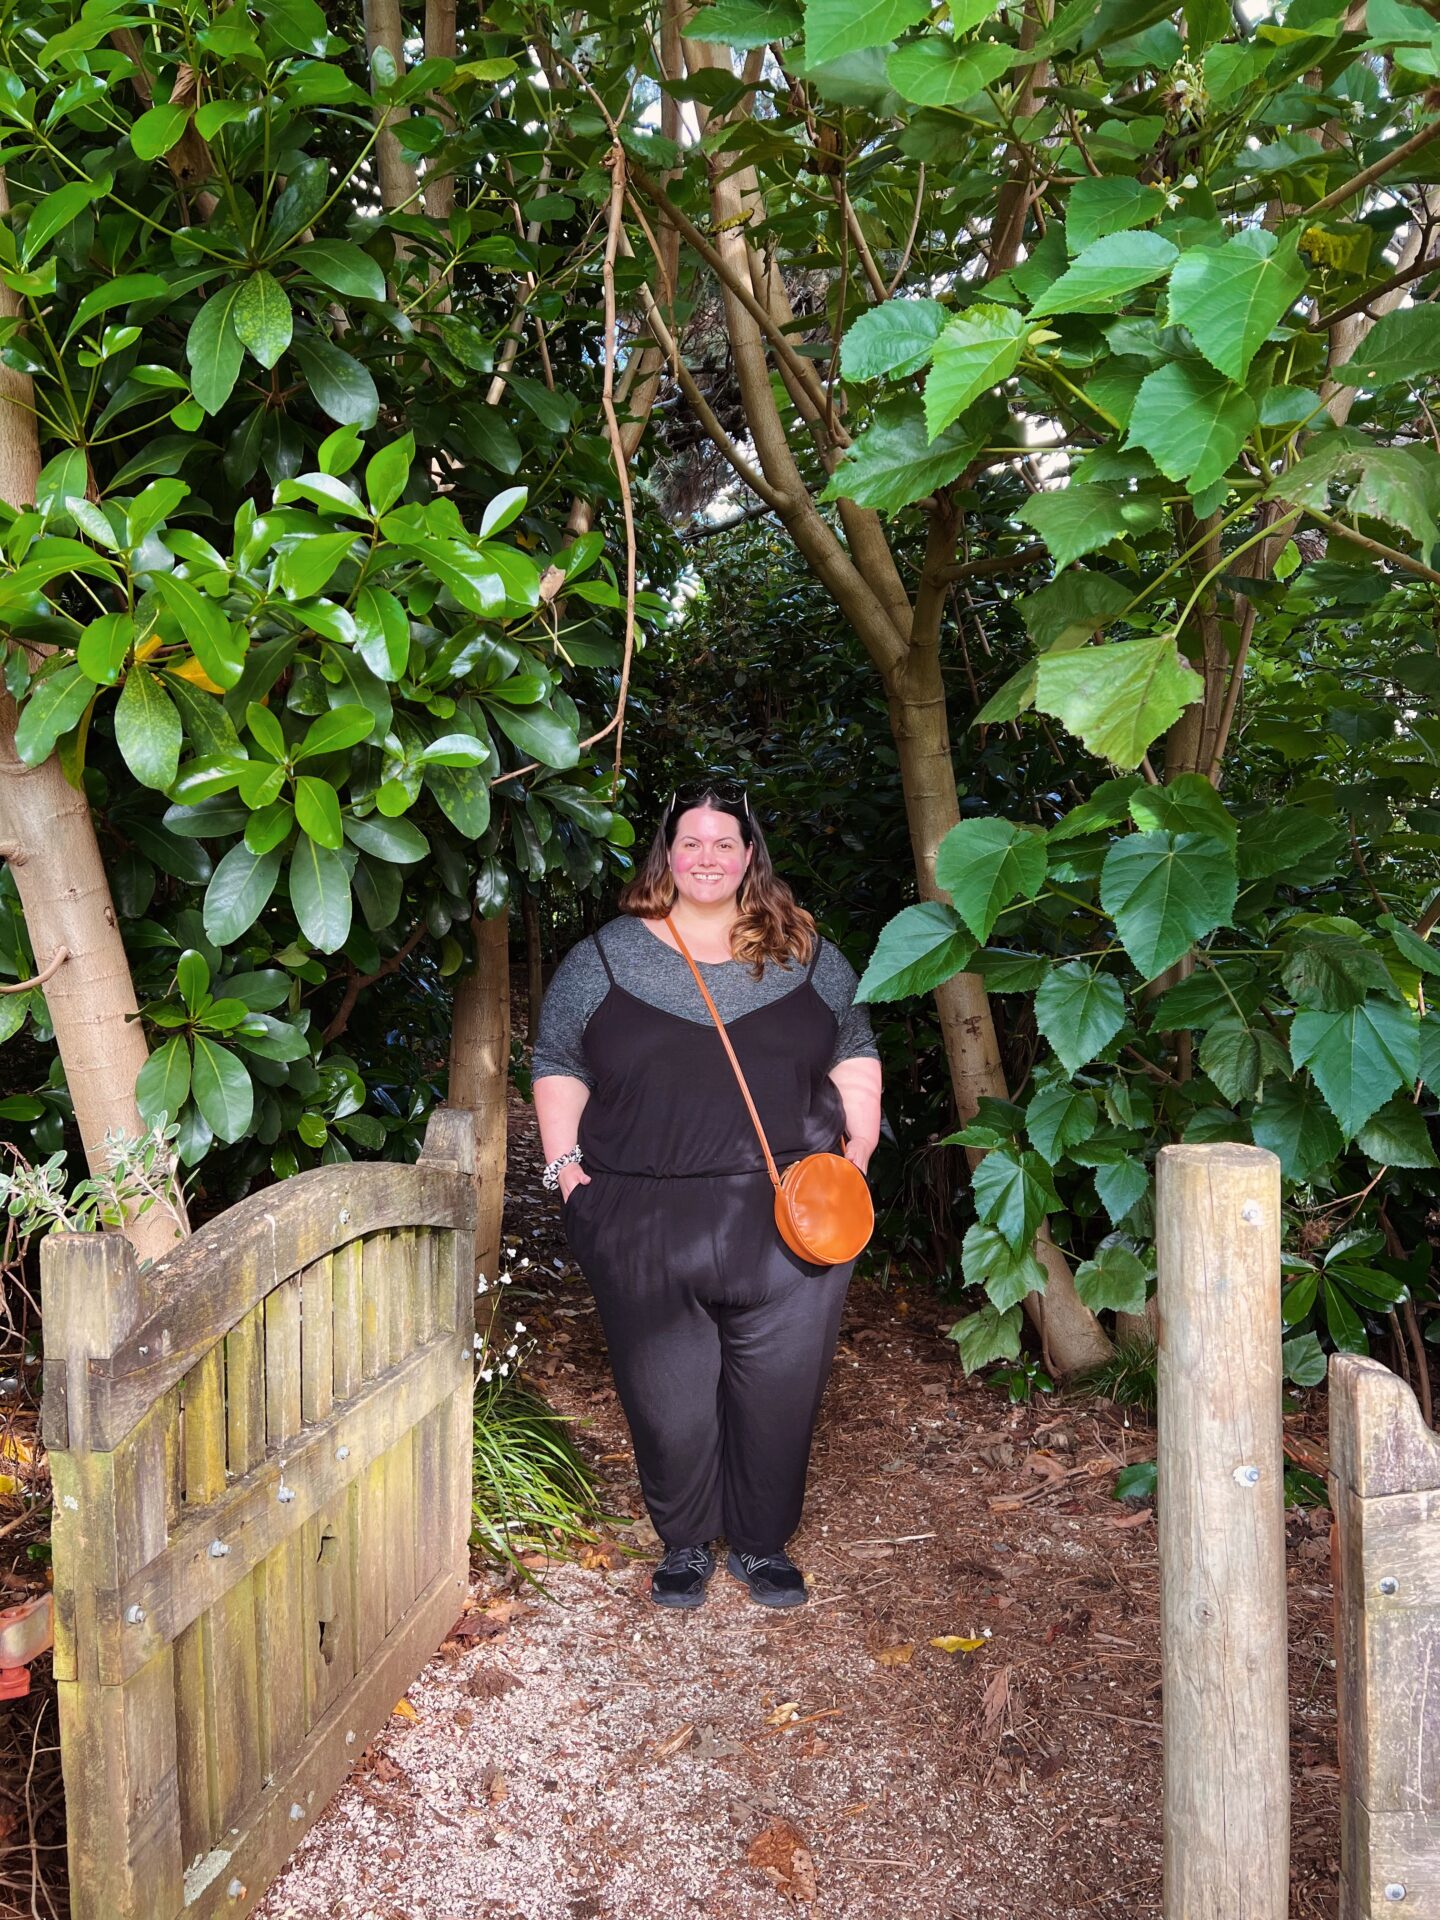 Meagan, a fat Māori woman, stands at the gated entrance to a wooded area. She is wearing a black jumpsuit with spaghetti straps over a grey marle tee, black sneakers and a tan cross body bag.